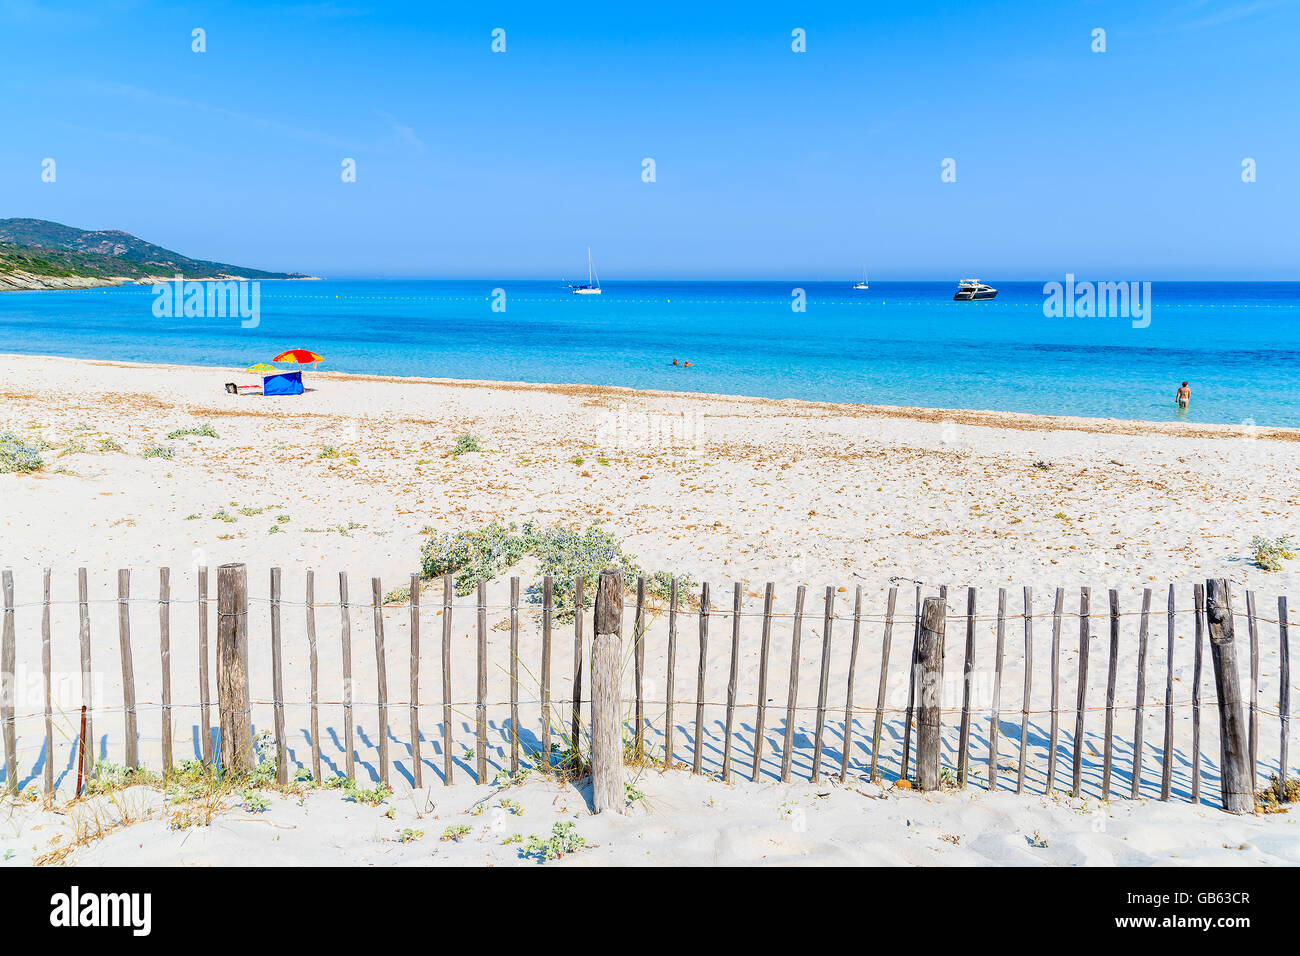 A view of Saleccia beach with white sand and azure sea water near Saint Florent, Corsica island, France Stock Photo